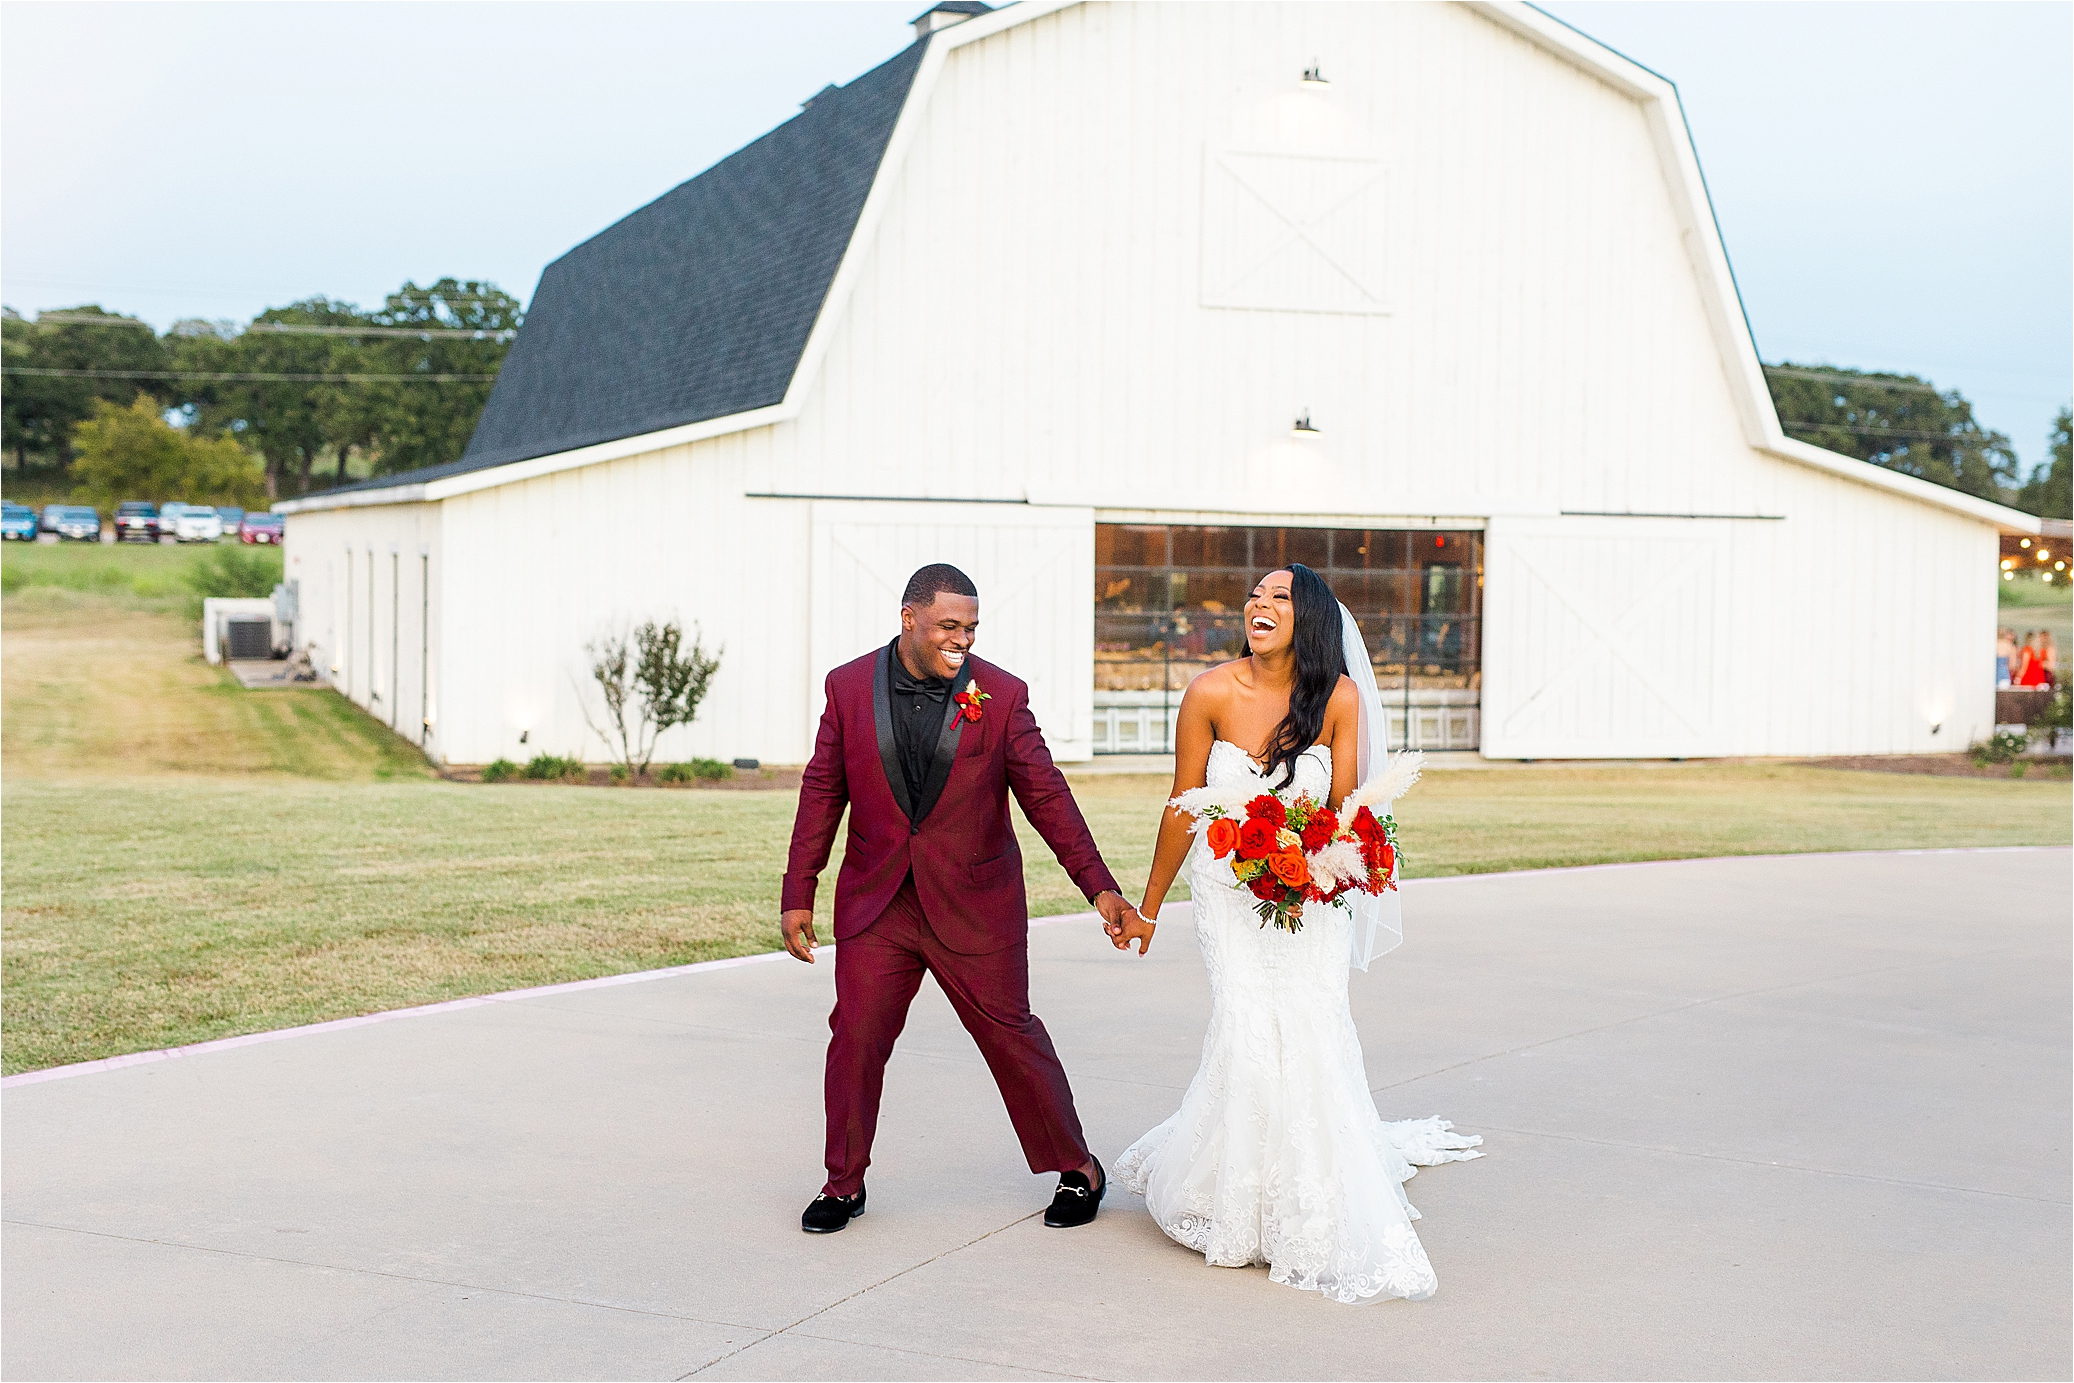 Newlyweds hold hand and laugh hysterically in front of white barn at Milestone by Boerne Wedding Photographer Jillian Hogan 